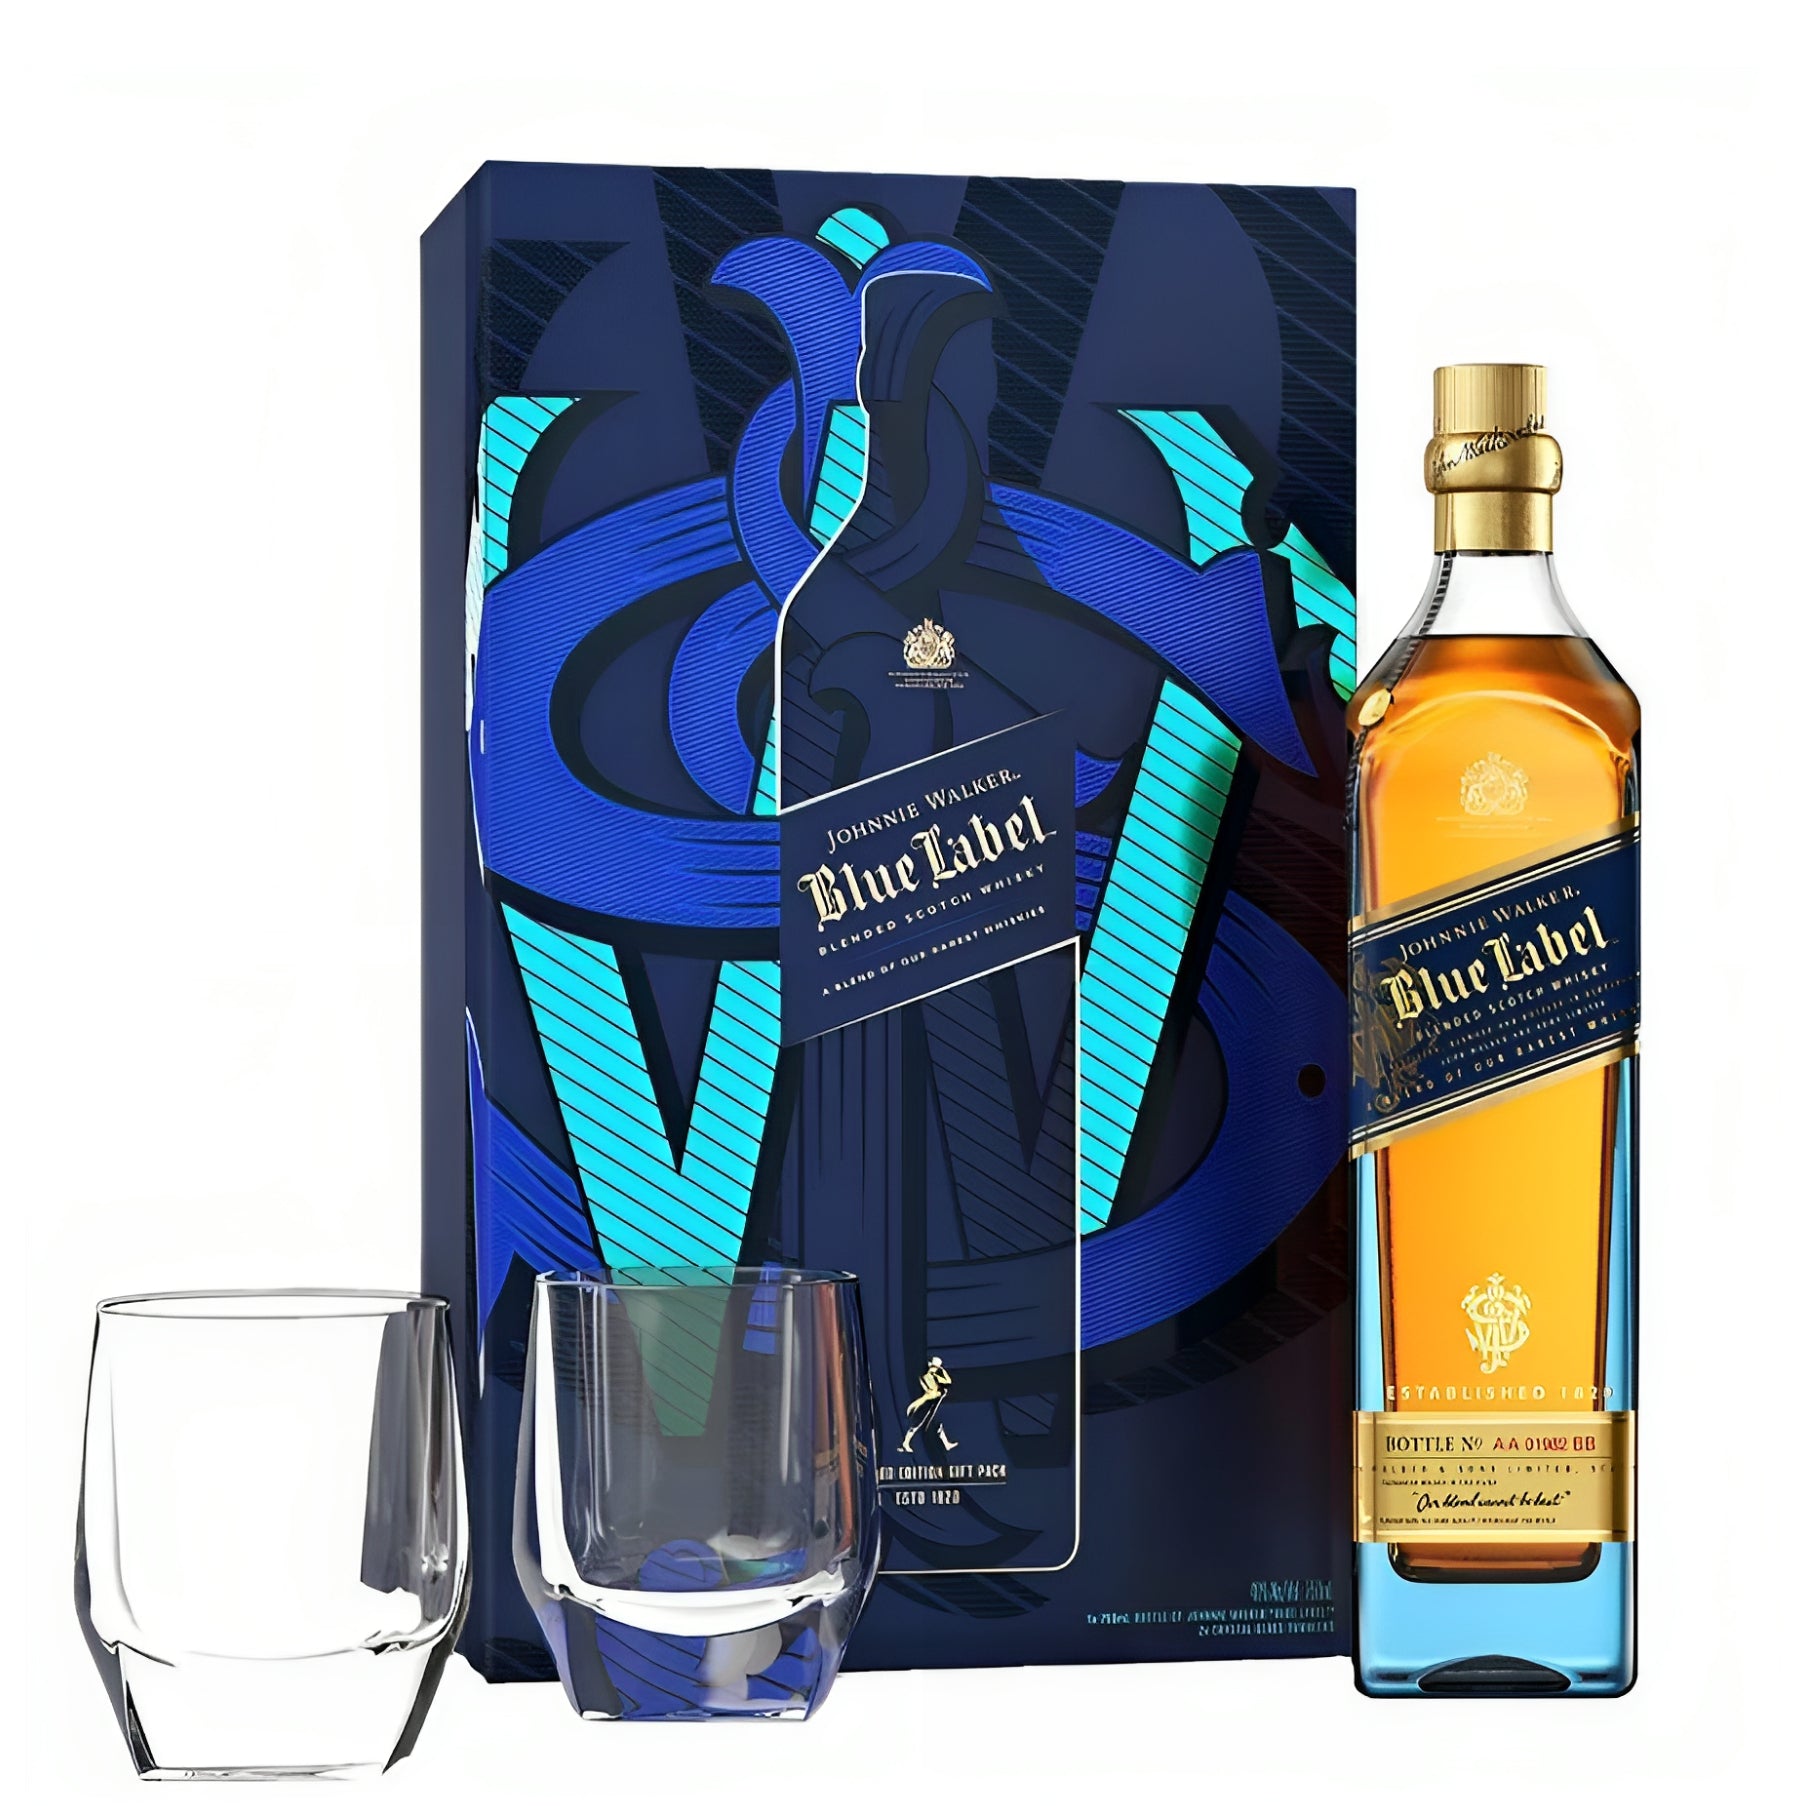 Johnnie Walker Red Label Blended Scotch Whisky 40% 1L in duty-free at  airport Mumbai - on Arrival